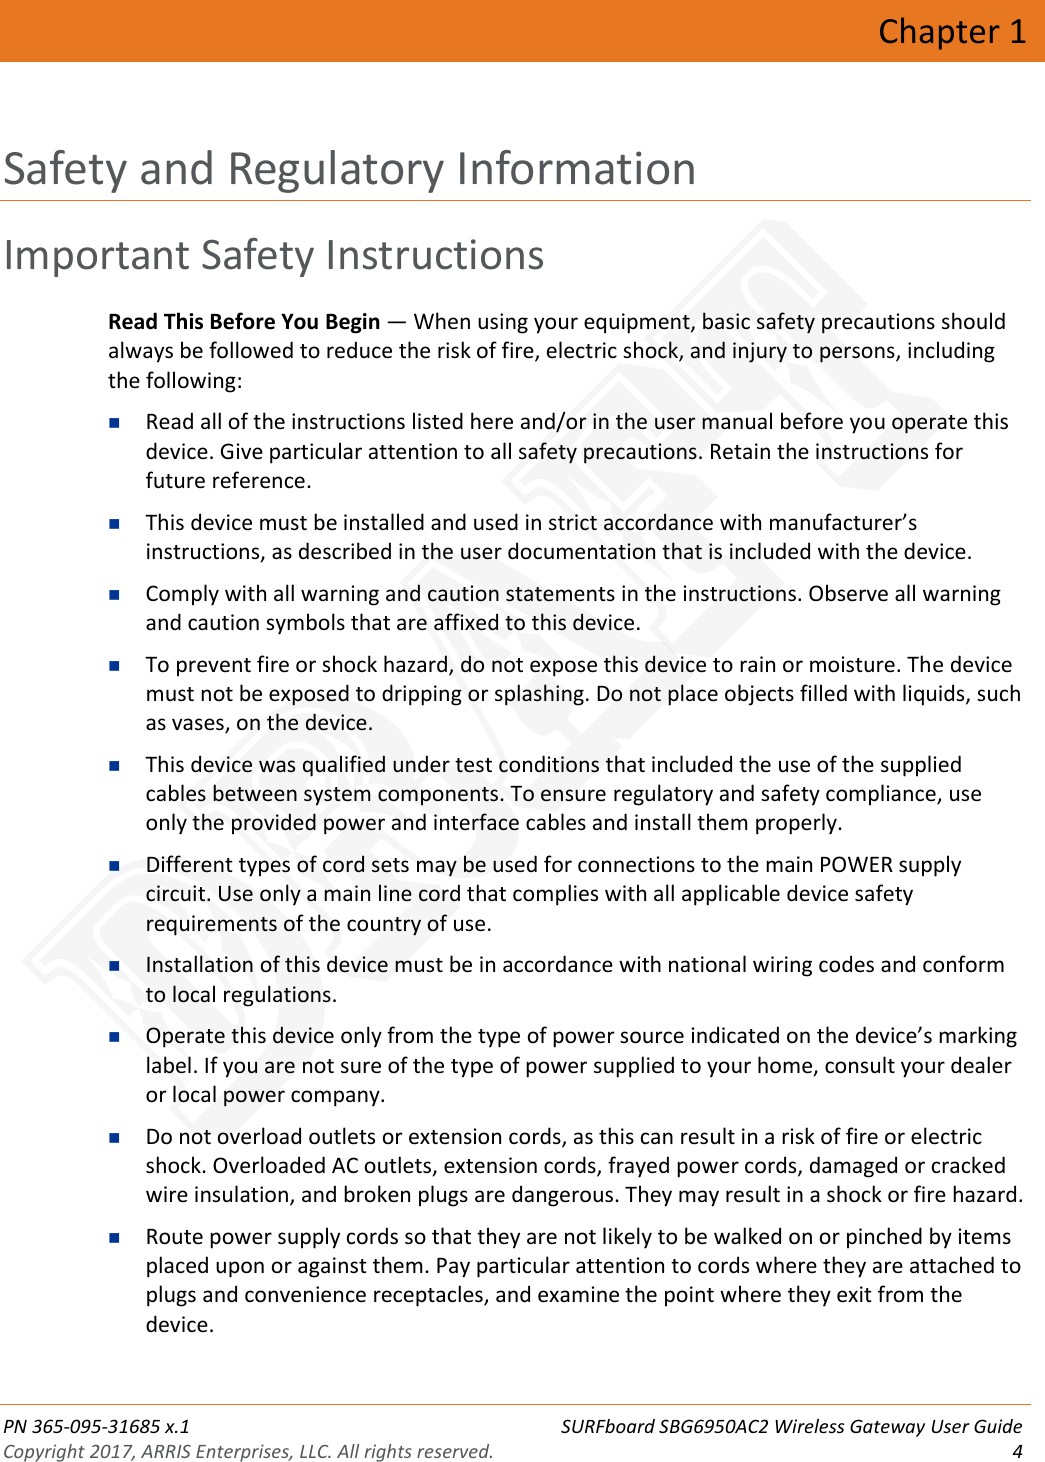  PN 365-095-31685 x.1 SURFboard SBG6950AC2 Wireless Gateway User Guide Copyright 2017, ARRIS Enterprises, LLC. All rights reserved.  4  Chapter 1 Safety and Regulatory Information Important Safety Instructions Read This Before You Begin — When using your equipment, basic safety precautions should always be followed to reduce the risk of fire, electric shock, and injury to persons, including the following:   Read all of the instructions listed here and/or in the user manual before you operate this device. Give particular attention to all safety precautions. Retain the instructions for future reference.  This device must be installed and used in strict accordance with manufacturer’s instructions, as described in the user documentation that is included with the device.  Comply with all warning and caution statements in the instructions. Observe all warning and caution symbols that are affixed to this device.  To prevent fire or shock hazard, do not expose this device to rain or moisture. The device must not be exposed to dripping or splashing. Do not place objects filled with liquids, such as vases, on the device.  This device was qualified under test conditions that included the use of the supplied cables between system components. To ensure regulatory and safety compliance, use only the provided power and interface cables and install them properly.   Different types of cord sets may be used for connections to the main POWER supply circuit. Use only a main line cord that complies with all applicable device safety requirements of the country of use.  Installation of this device must be in accordance with national wiring codes and conform to local regulations.  Operate this device only from the type of power source indicated on the device’s marking label. If you are not sure of the type of power supplied to your home, consult your dealer or local power company.  Do not overload outlets or extension cords, as this can result in a risk of fire or electric shock. Overloaded AC outlets, extension cords, frayed power cords, damaged or cracked wire insulation, and broken plugs are dangerous. They may result in a shock or fire hazard.  Route power supply cords so that they are not likely to be walked on or pinched by items placed upon or against them. Pay particular attention to cords where they are attached to plugs and convenience receptacles, and examine the point where they exit from the device. DRAFT